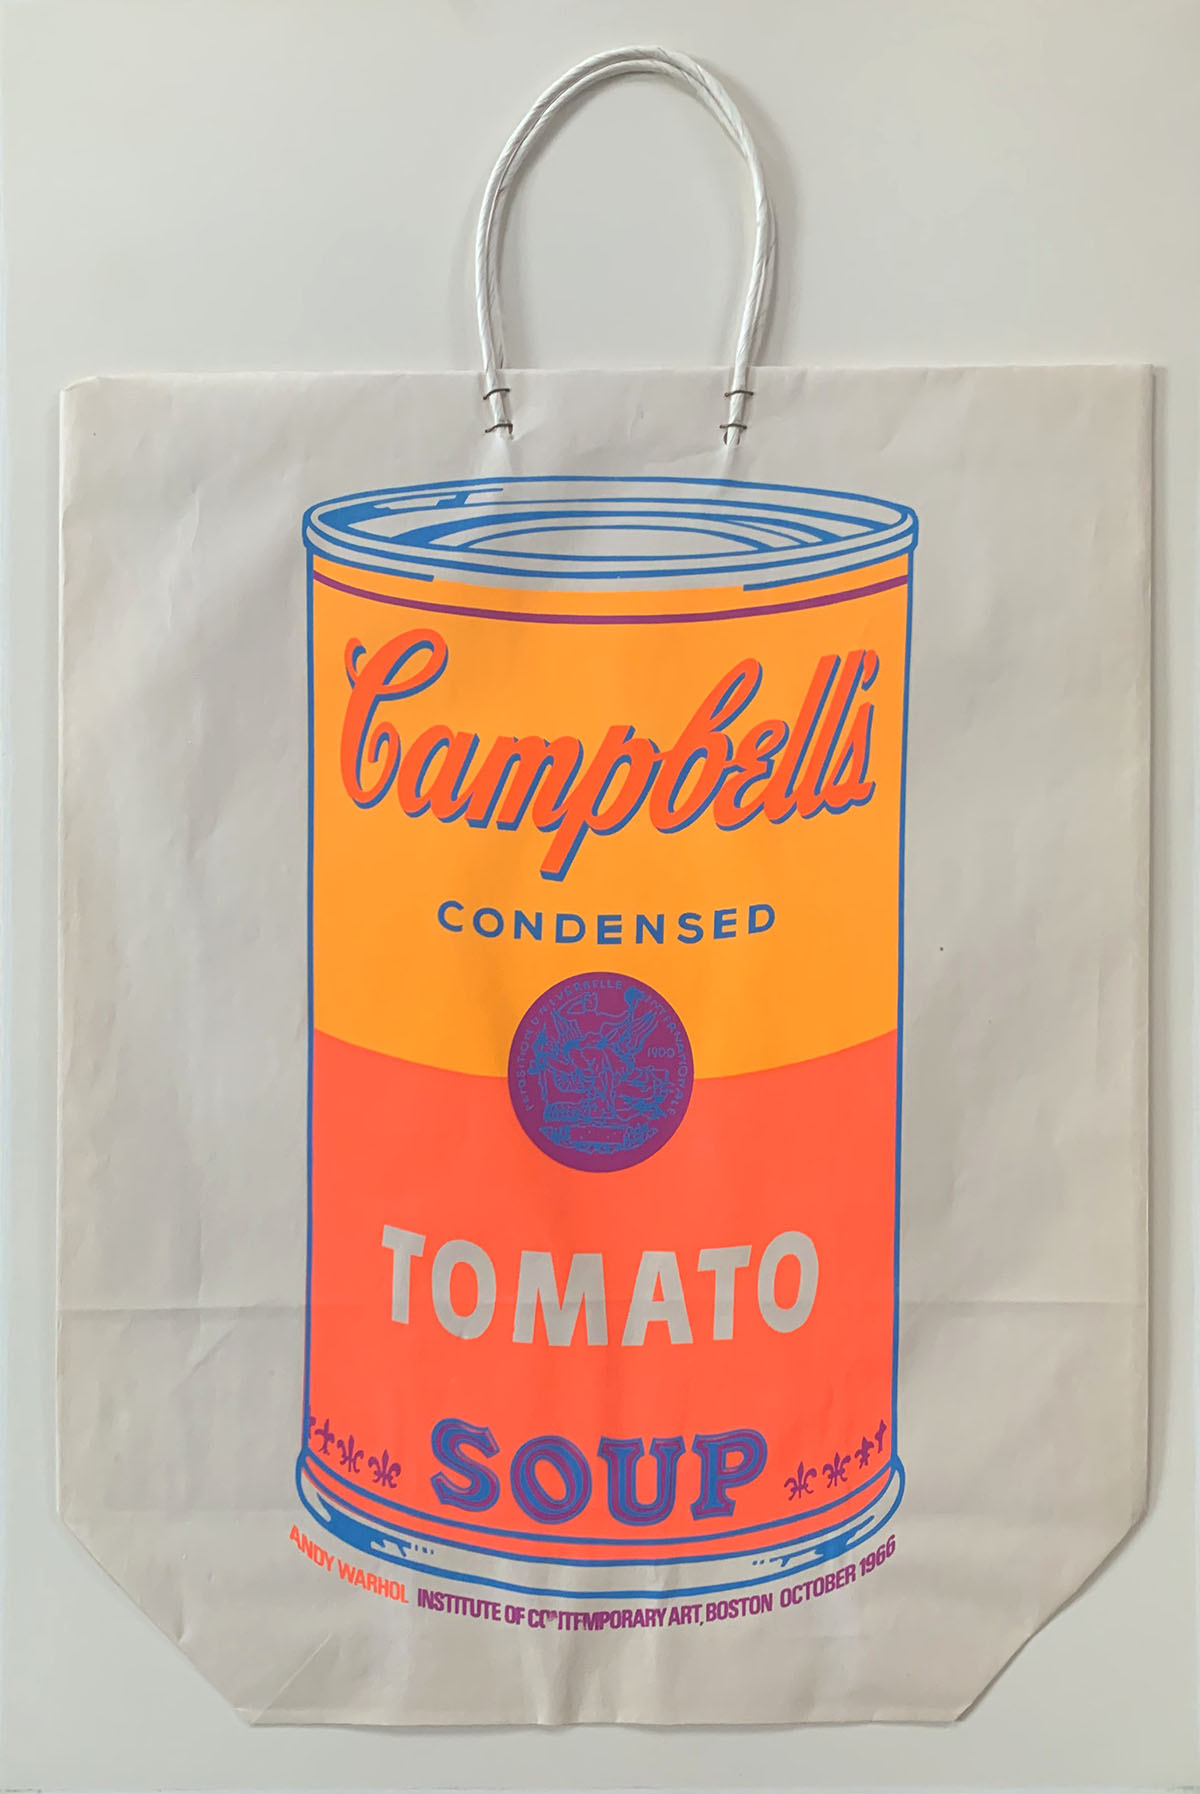 ANDY WARHOL SHOPPING BAG: Campbell's